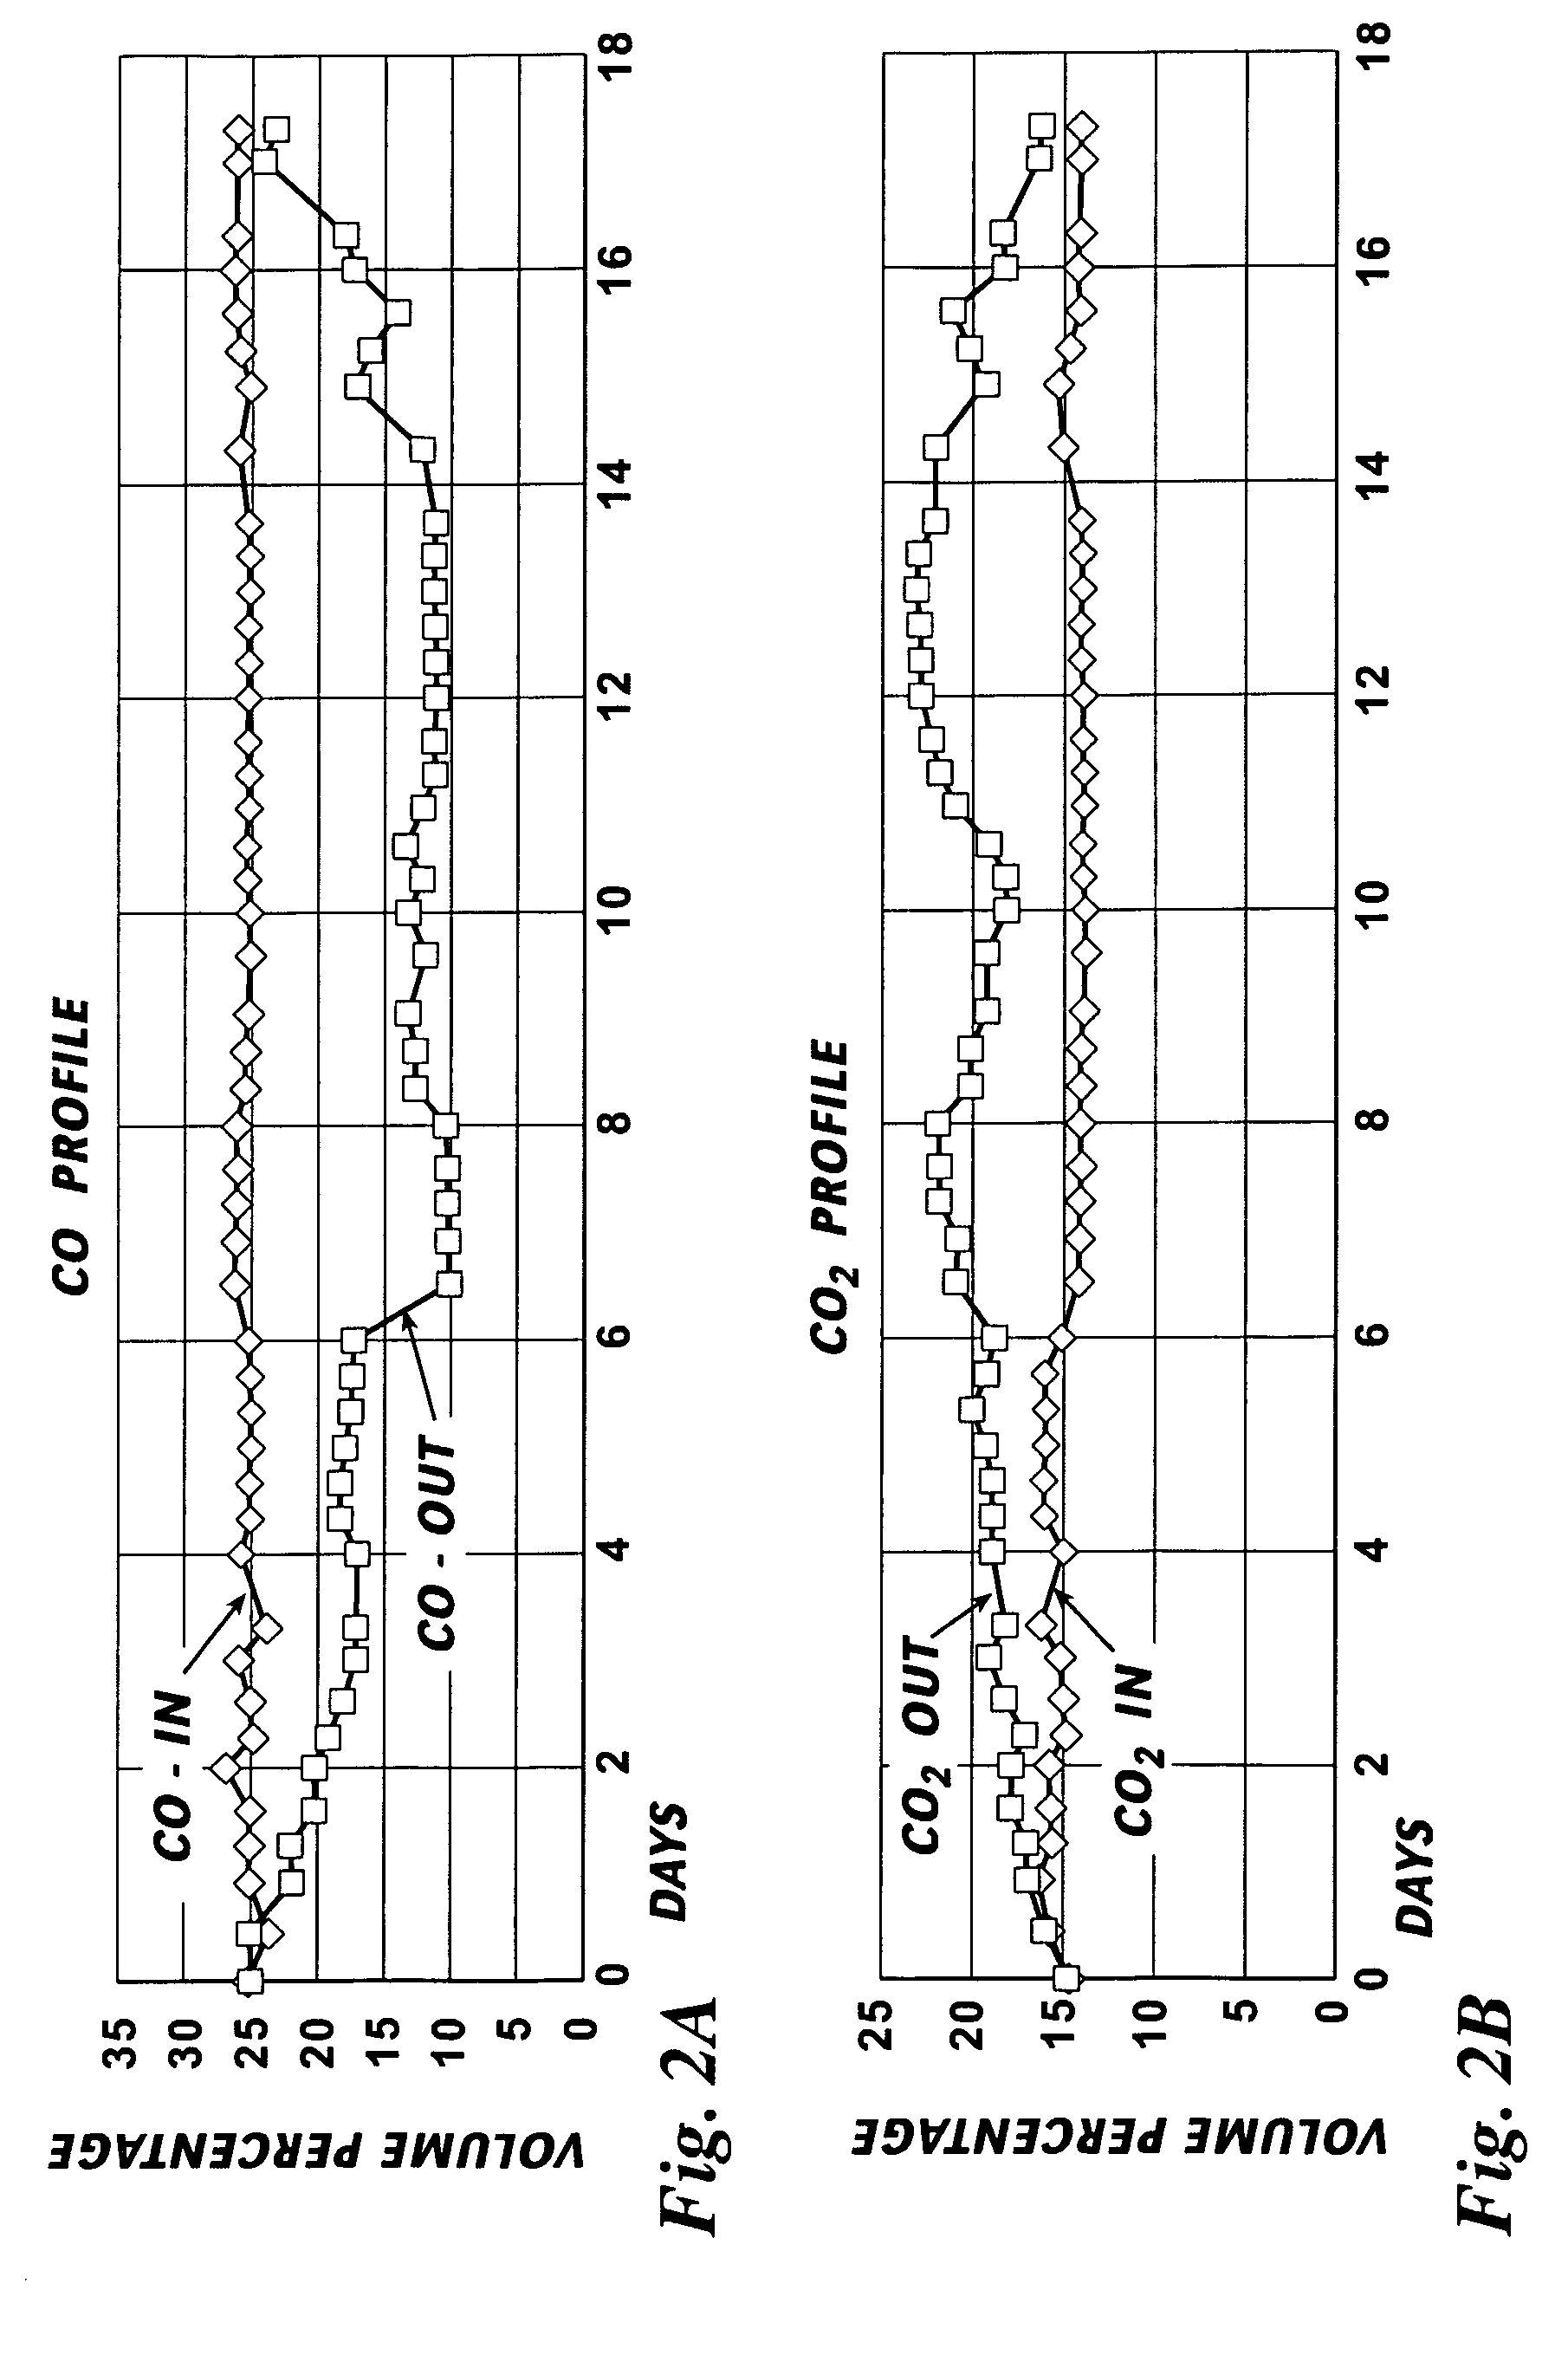 Indirect or direct fermentation of biomass to fuel alcohol